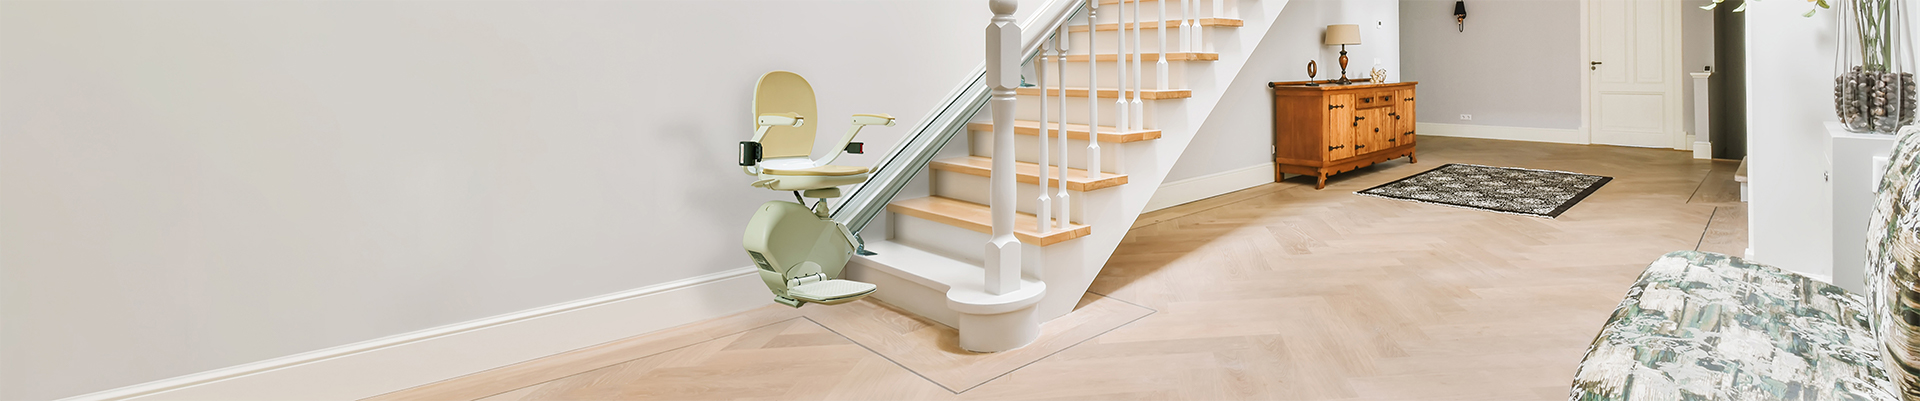 Stairlifts in a Leeds home